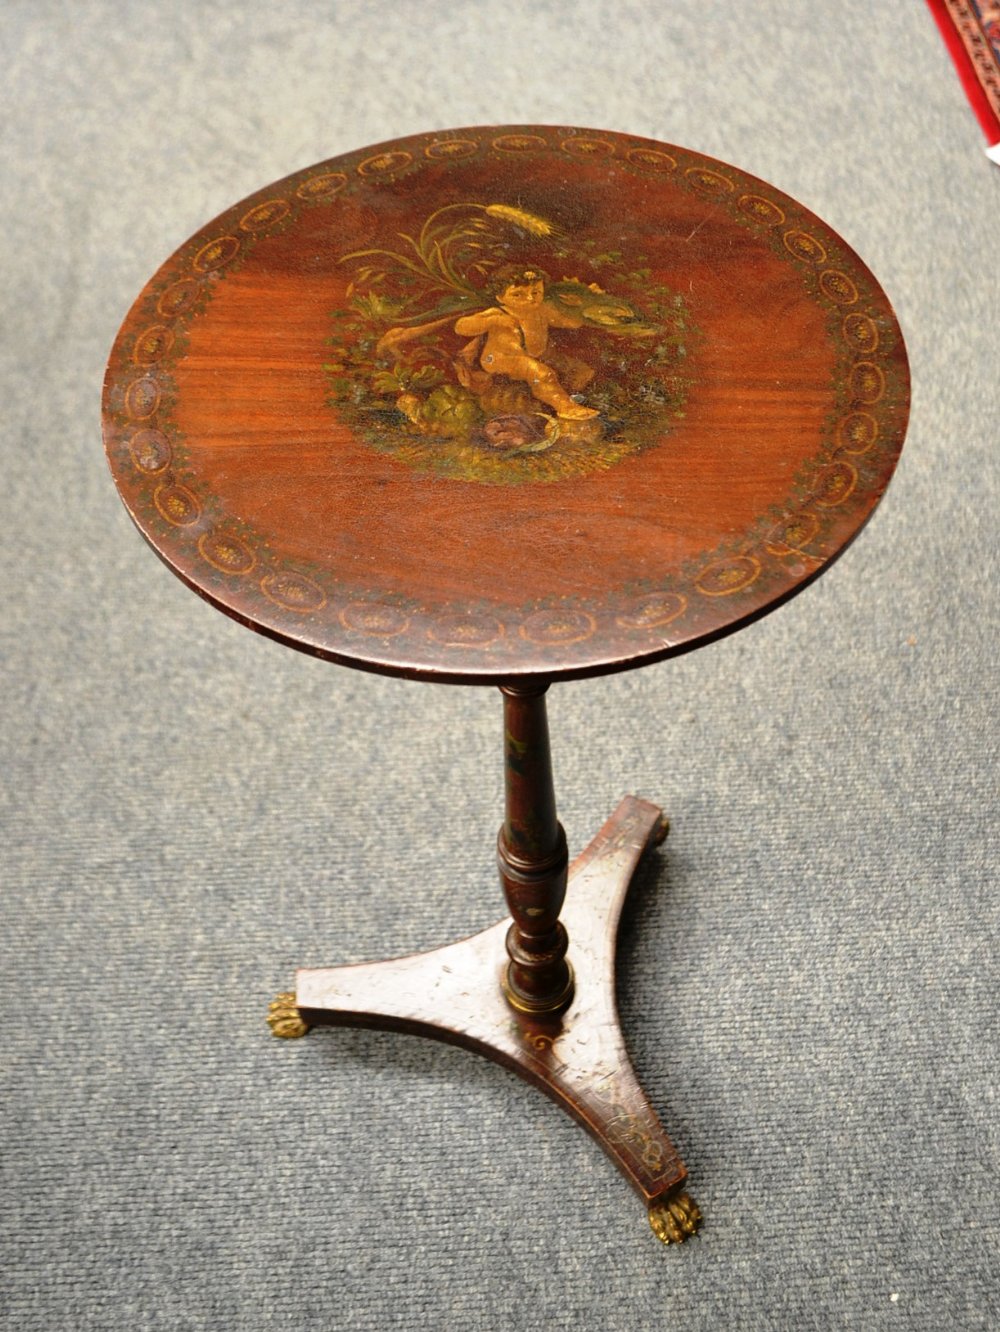 A Satinwood and Polychrome Decorated Tripod Table, in George III style, the top decorated with a